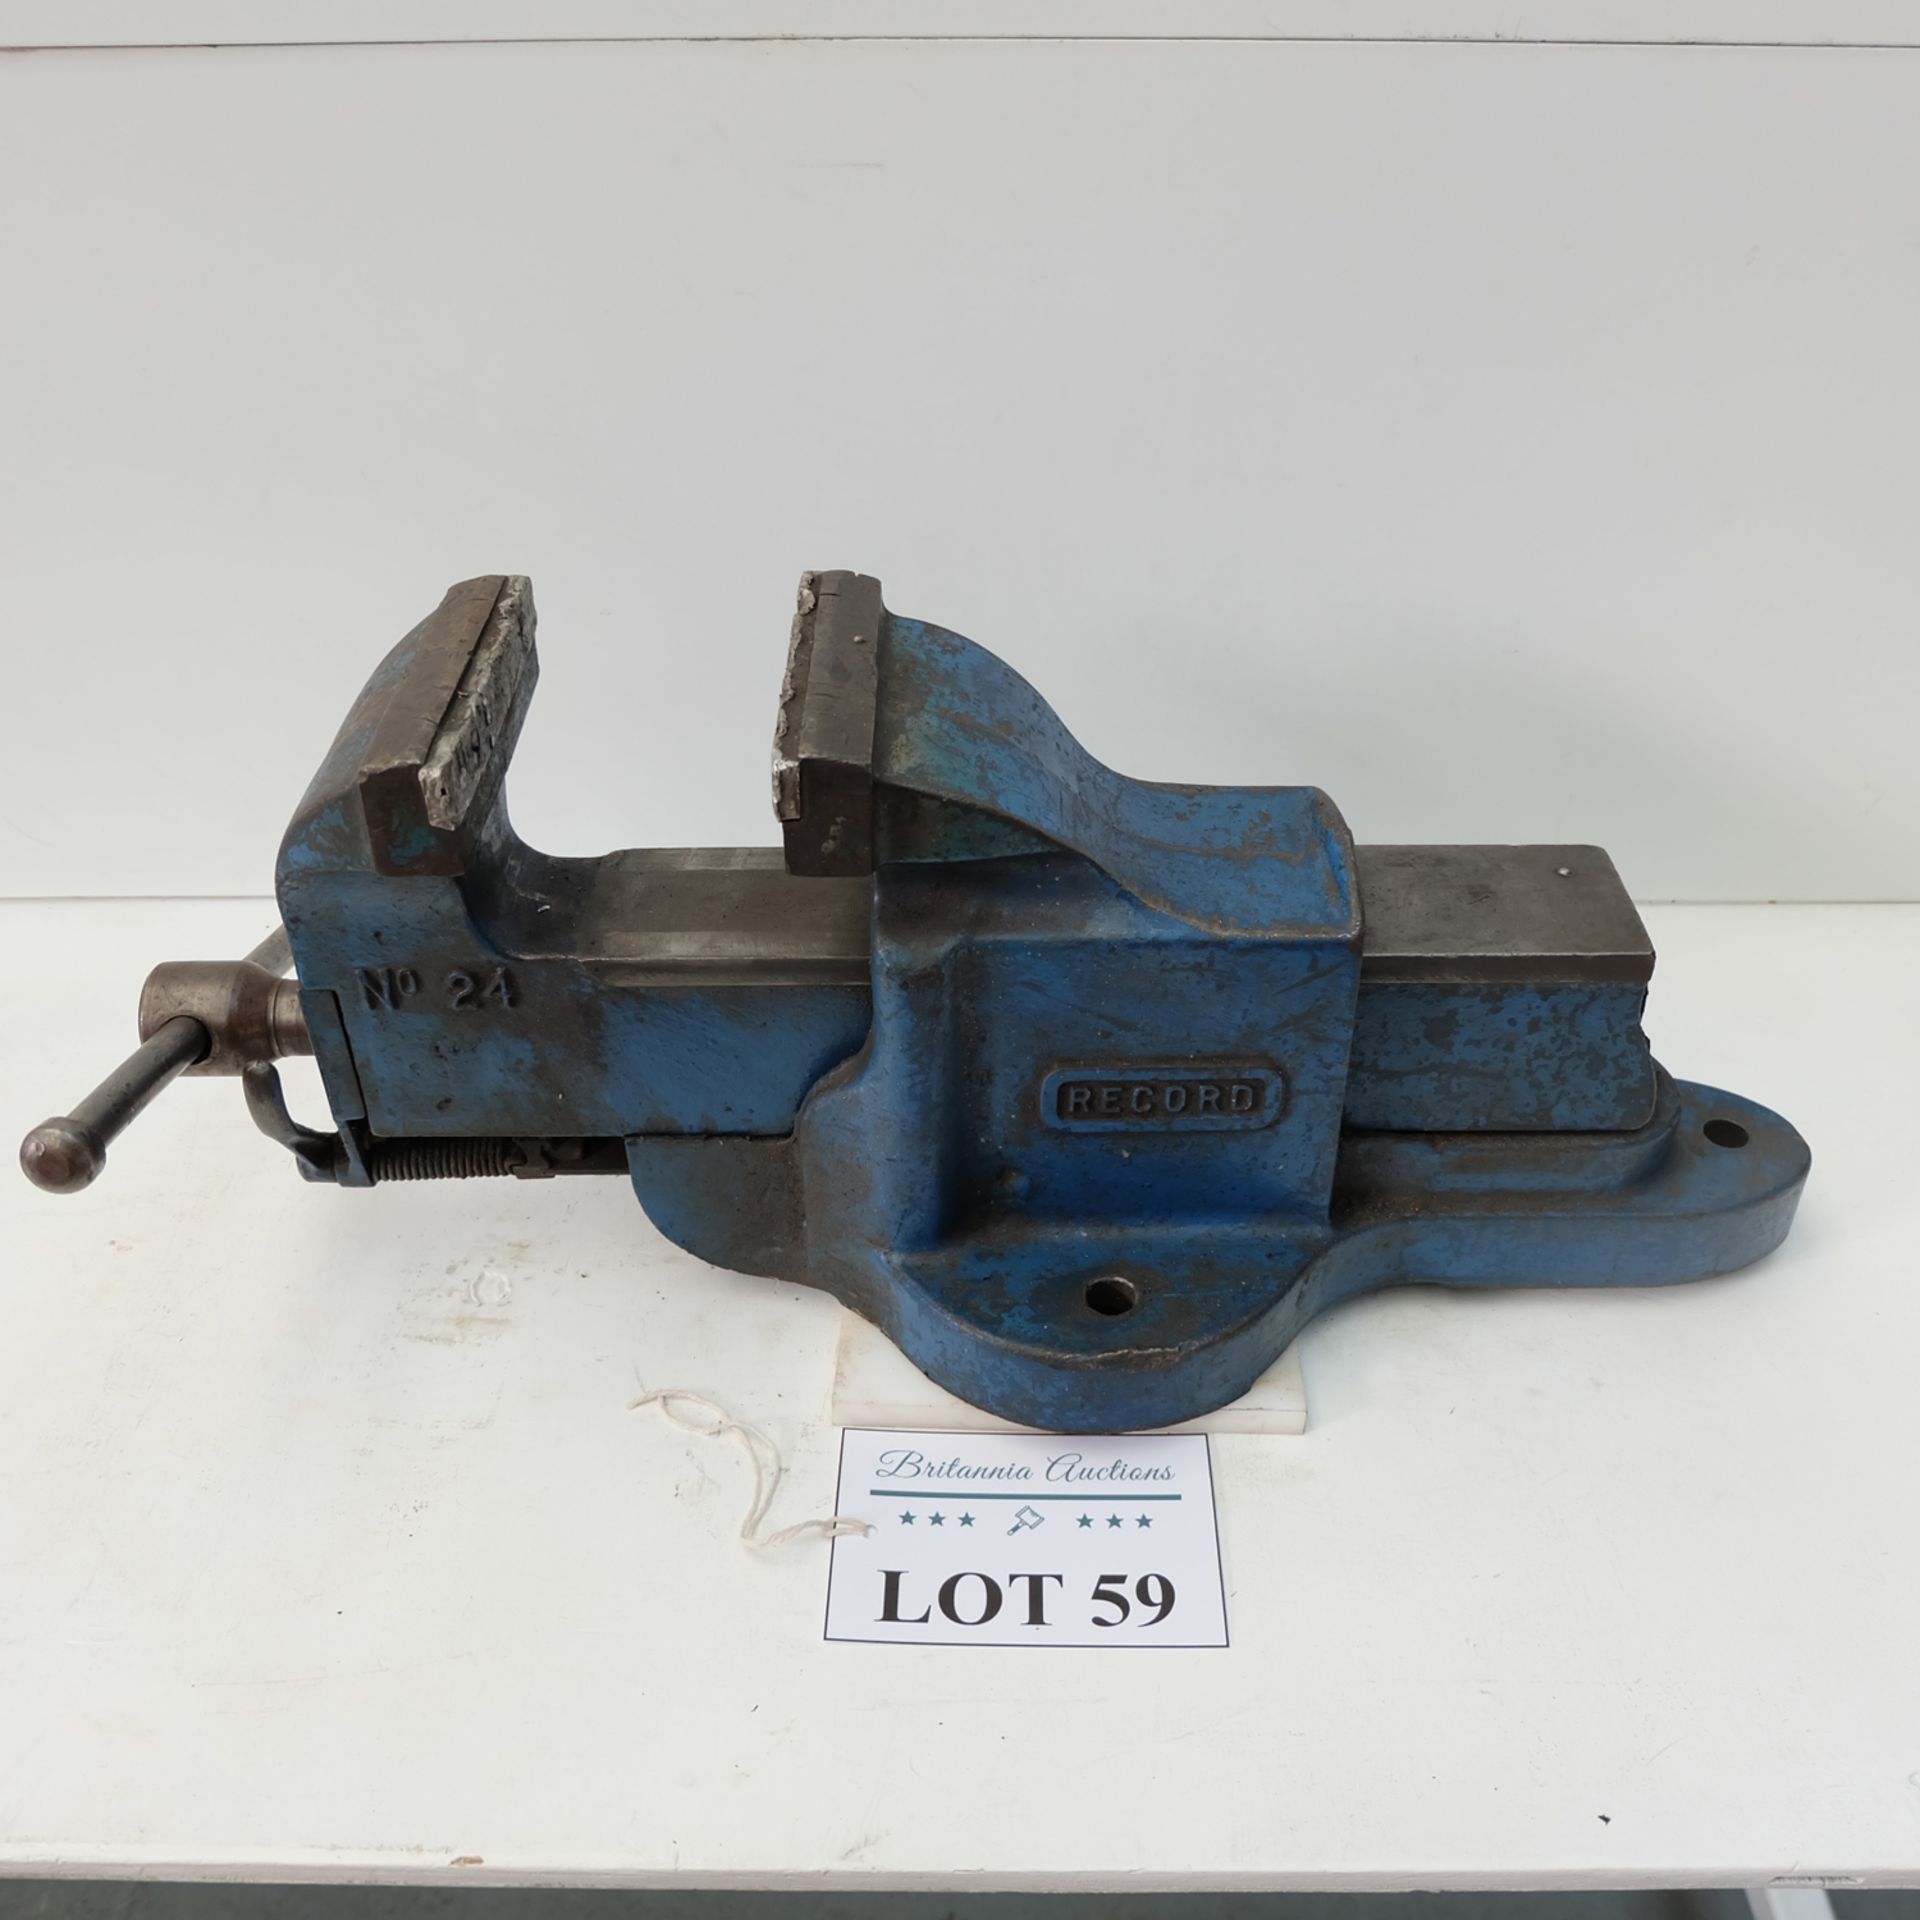 Record No.24 Quick Release Bench Vice. Jaw Width 5 1/2". Max Opening 7". Jaw Height 3 3/4" Approx.